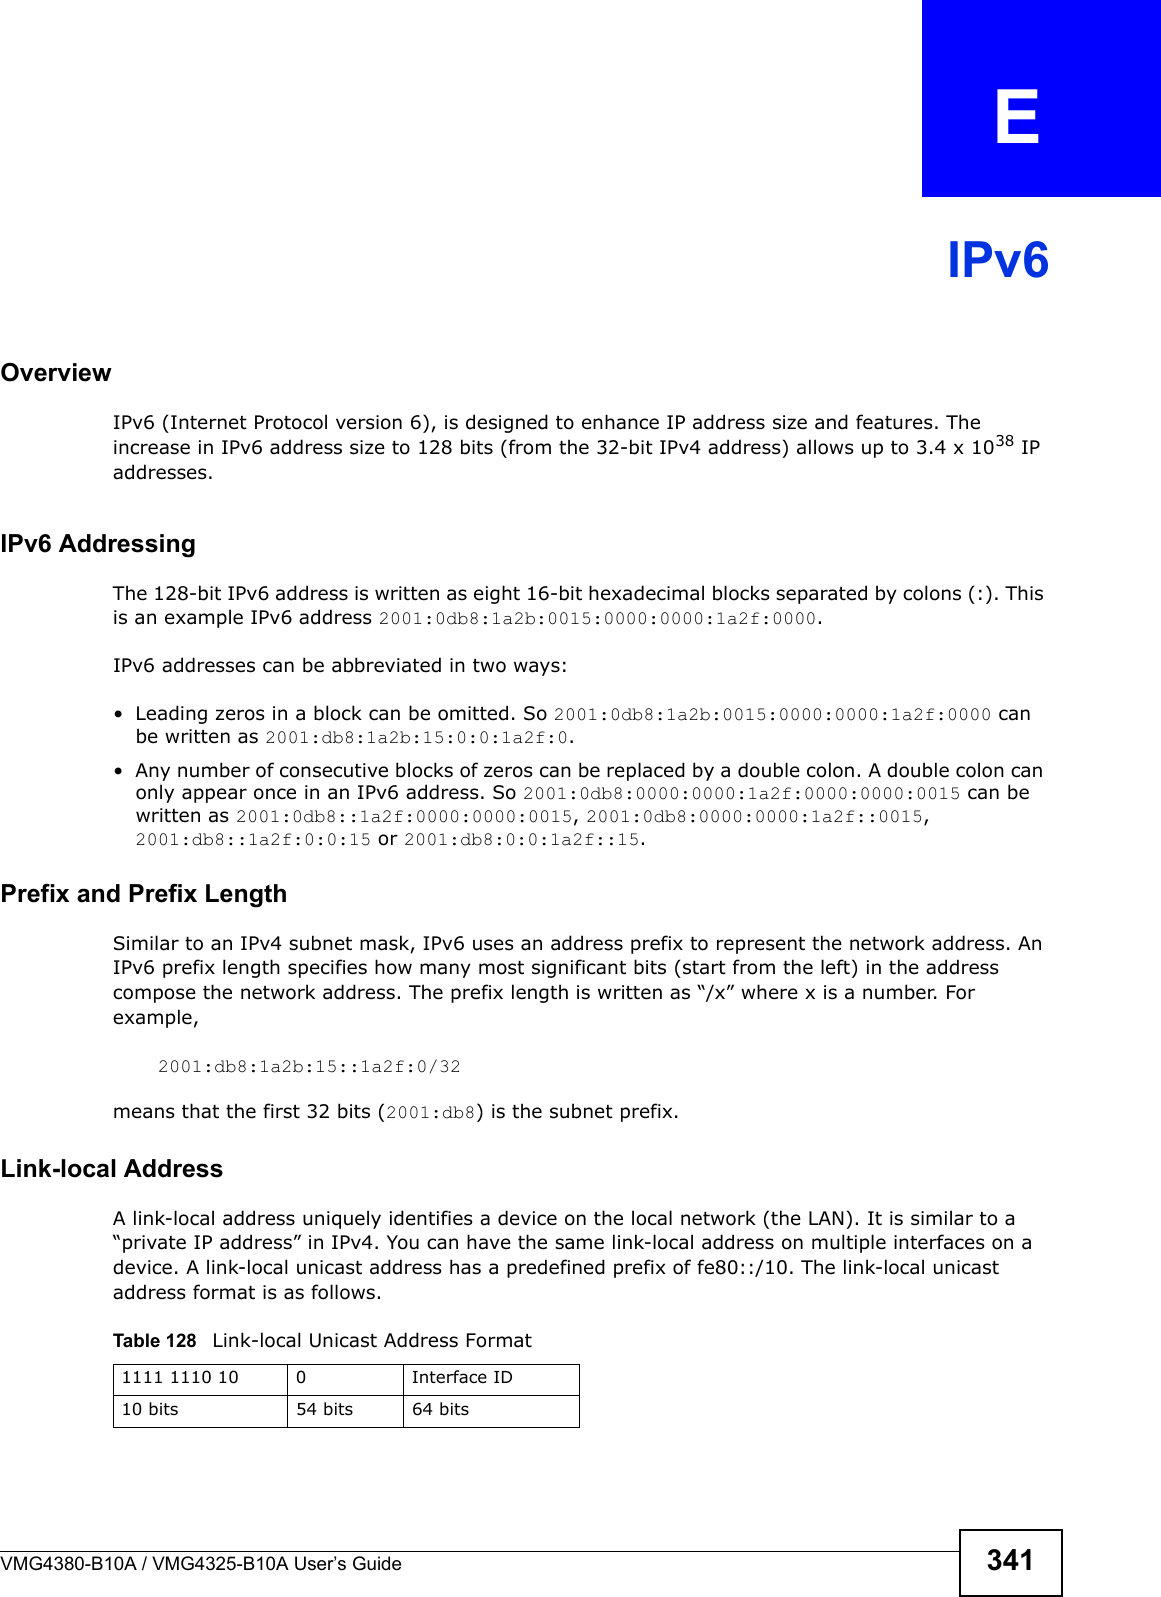 VMG4380-B10A / VMG4325-B10A User’s Guide 341APPENDIX  EIPv6OverviewIPv6 (Internet Protocol version 6), is designed to enhance IP address size and features. The increase in IPv6 address size to 128 bits (from the 32-bit IPv4 address) allows up to 3.4 x 1038 IP addresses. IPv6 AddressingThe 128-bit IPv6 address is written as eight 16-bit hexadecimal blocks separated by colons (:). This is an example IPv6 address 2001:0db8:1a2b:0015:0000:0000:1a2f:0000. IPv6 addresses can be abbreviated in two ways:• Leading zeros in a block can be omitted. So 2001:0db8:1a2b:0015:0000:0000:1a2f:0000 can be written as 2001:db8:1a2b:15:0:0:1a2f:0. • Any number of consecutive blocks of zeros can be replaced by a double colon. A double colon can only appear once in an IPv6 address. So 2001:0db8:0000:0000:1a2f:0000:0000:0015 can be written as 2001:0db8::1a2f:0000:0000:0015, 2001:0db8:0000:0000:1a2f::0015, 2001:db8::1a2f:0:0:15 or 2001:db8:0:0:1a2f::15.Prefix and Prefix LengthSimilar to an IPv4 subnet mask, IPv6 uses an address prefix to represent the network address. An IPv6 prefix length specifies how many most significant bits (start from the left) in the address compose the network address. The prefix length is written as “/x” where x is a number. For example,2001:db8:1a2b:15::1a2f:0/32means that the first 32 bits (2001:db8) is the subnet prefix. Link-local AddressA link-local address uniquely identifies a device on the local network (the LAN). It is similar to a “private IP address” in IPv4. You can have the same link-local address on multiple interfaces on a device. A link-local unicast address has a predefined prefix of fe80::/10. The link-local unicast address format is as follows.Table 128   Link-local Unicast Address Format1111 1110 10 0 Interface ID10 bits 54 bits 64 bits